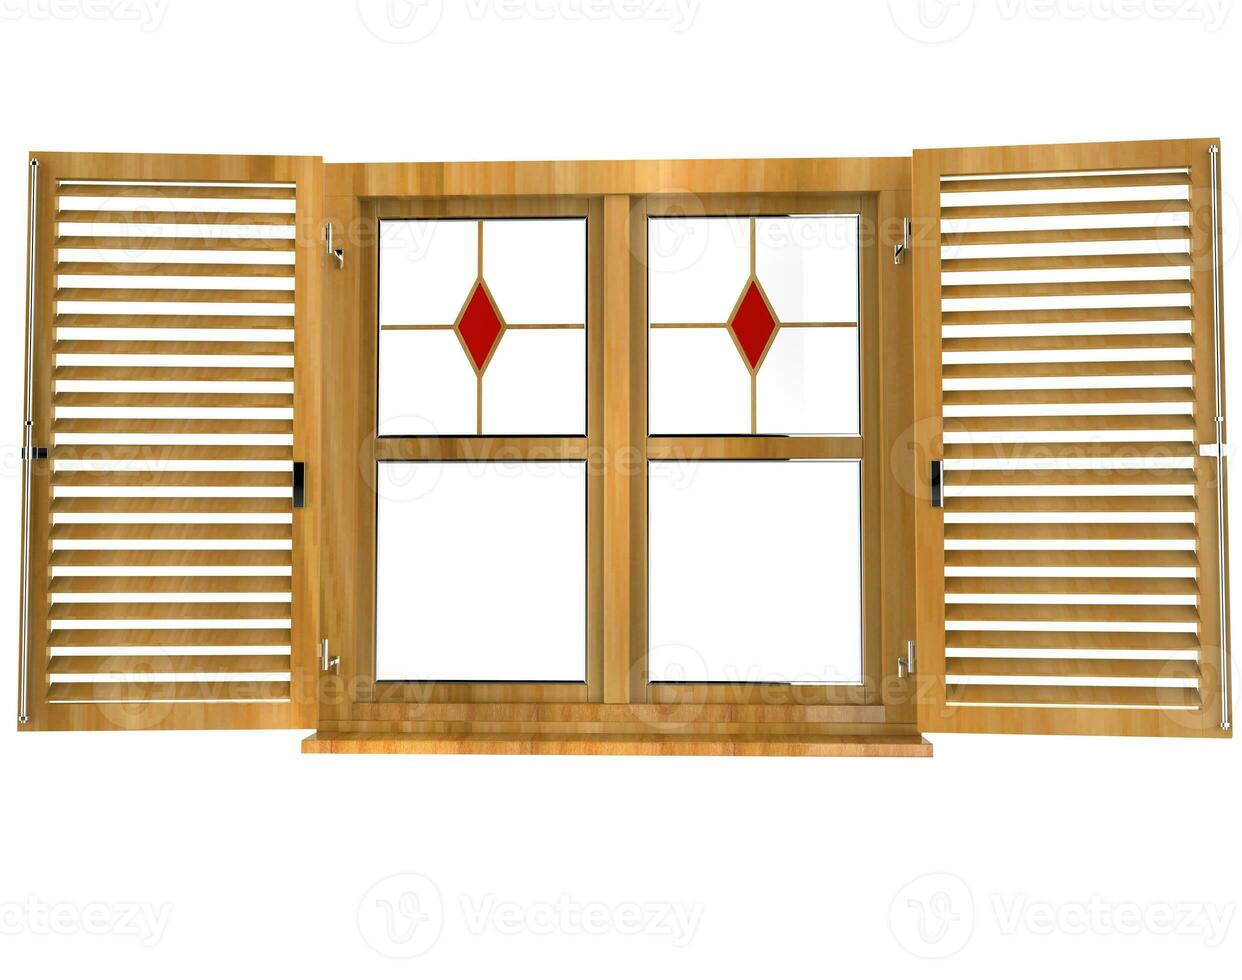 Window with stained glass and open shutters - front view photo